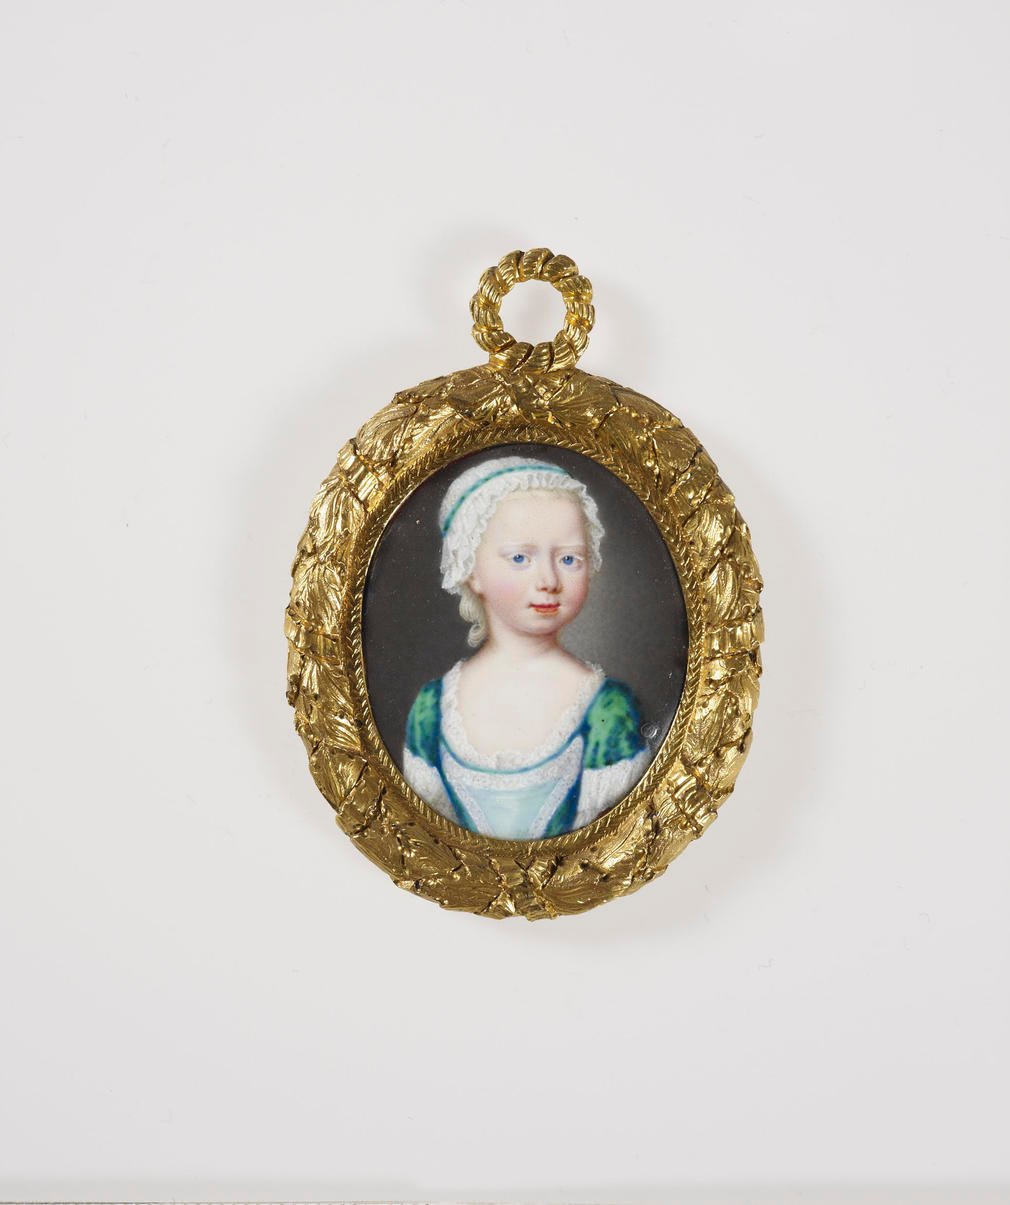 Amelia was the third child and second daughter of George II and Caroline of Ansbach. This portrait, painted from life, shows the Princess about four years old and was probably painted at the time of her grandfather's coronation as George I in 1714. She an